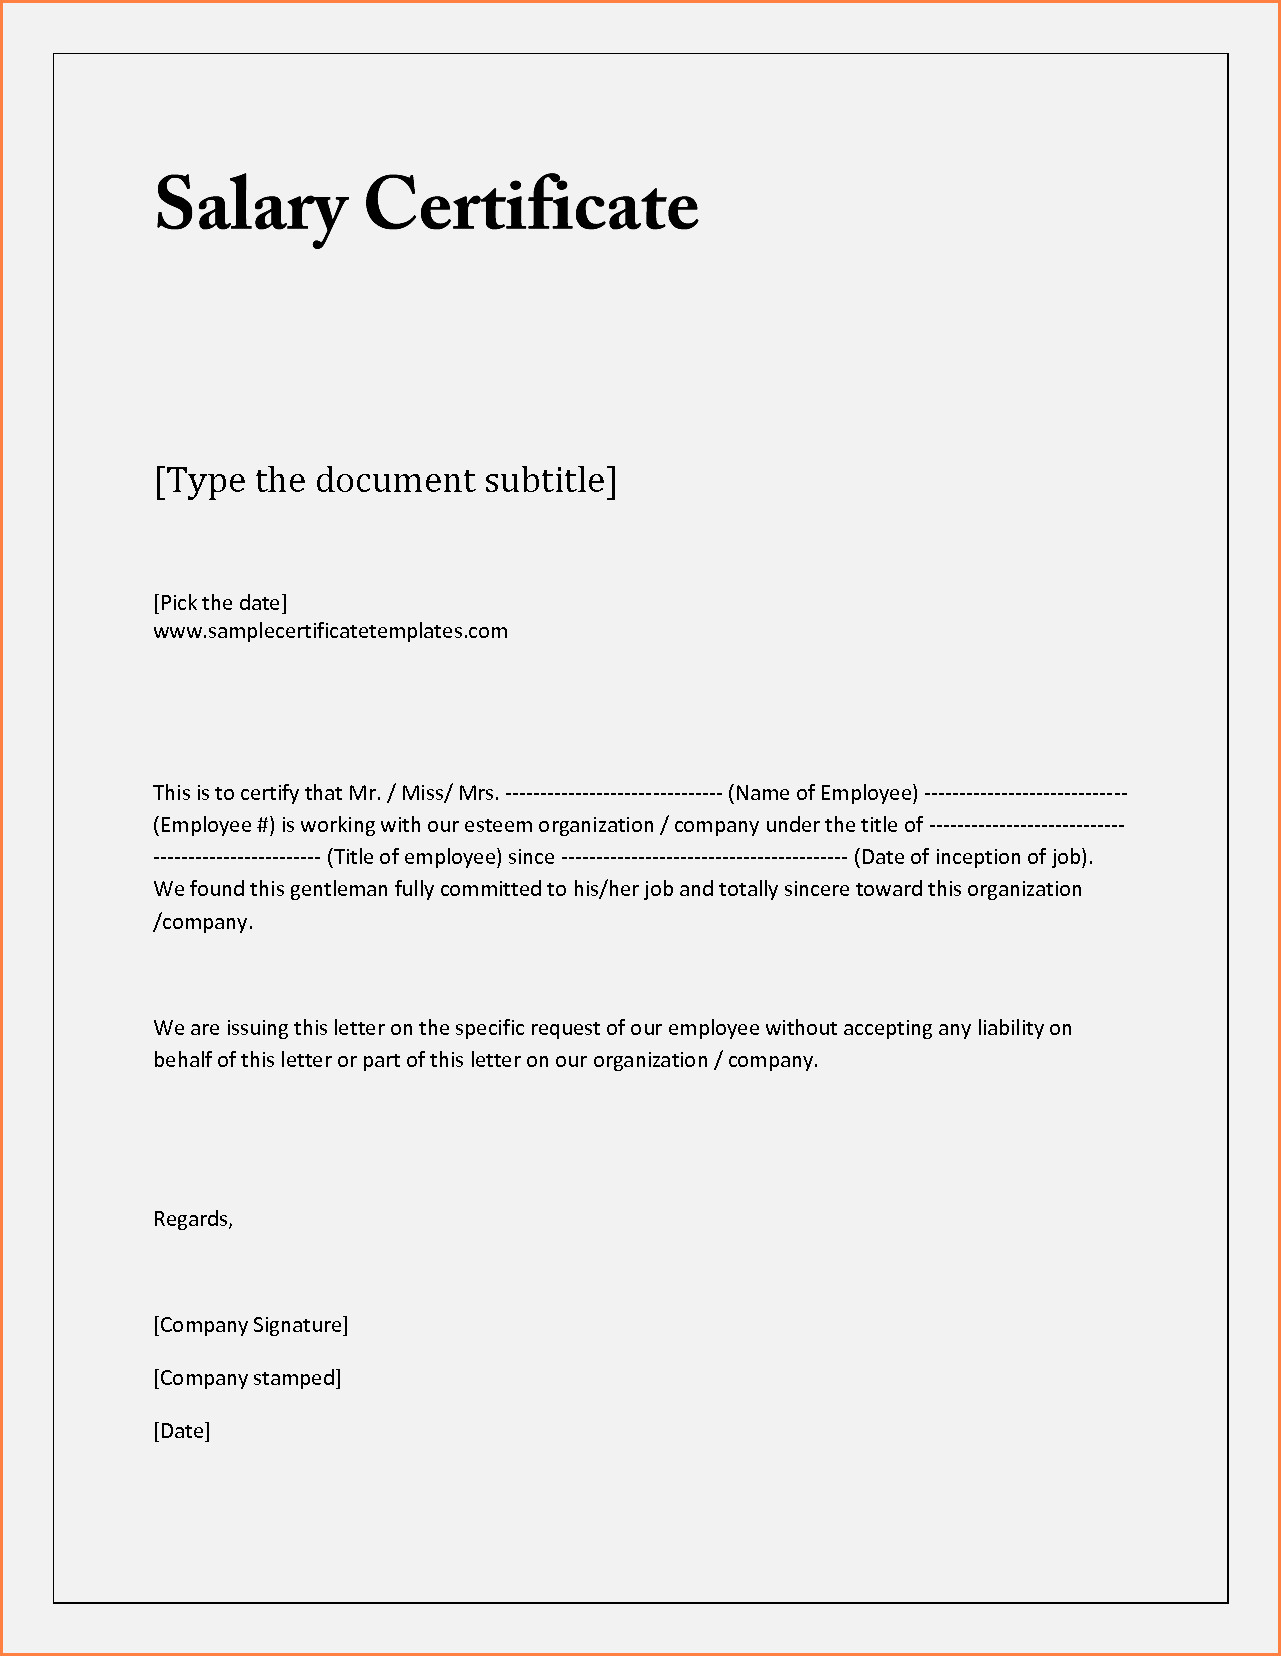 Gift Letter Template Uk - Borrow Money Contract Sample Inspirational 20 Awesome Salary